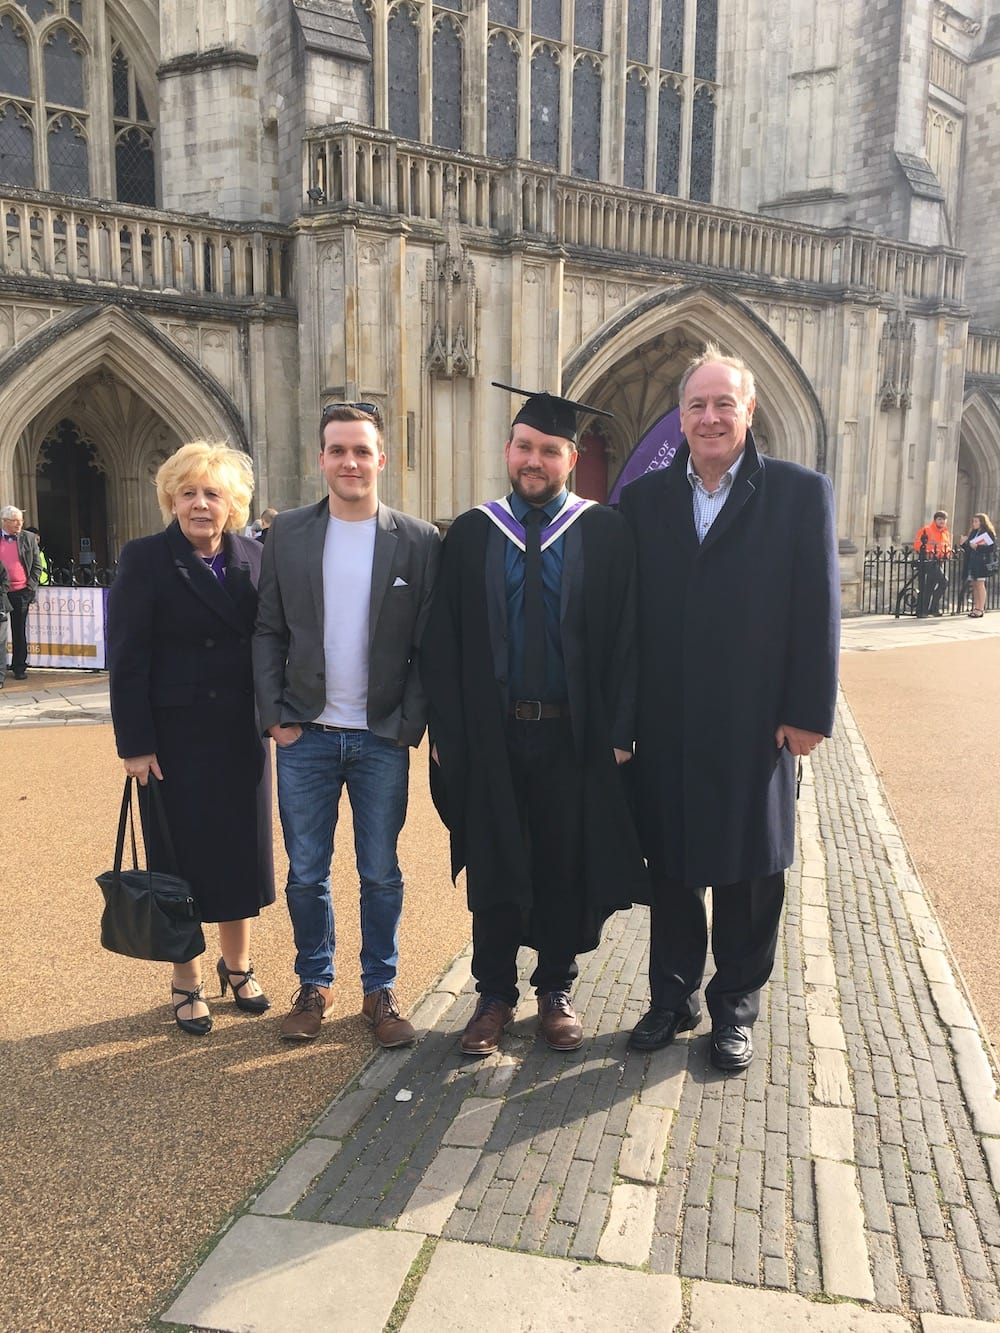 This is photo of Harry and his family at his brother's graduation